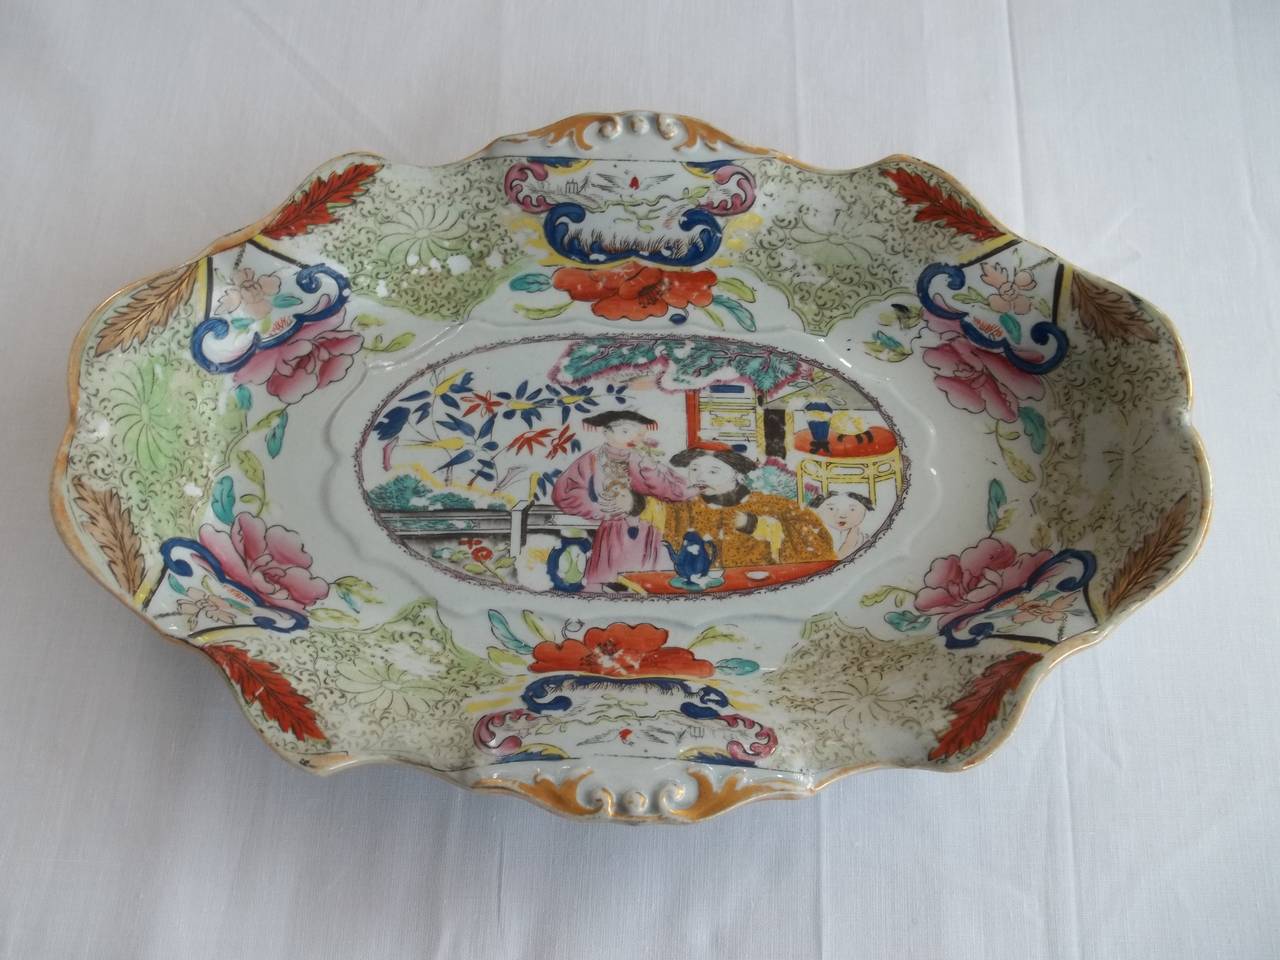 This is a very Early and RARE MASONs Ironstone Serving Dish, circa 1815.

The piece has nice scalloped edges and would originally have been part of a desert service.

The pattern is called 